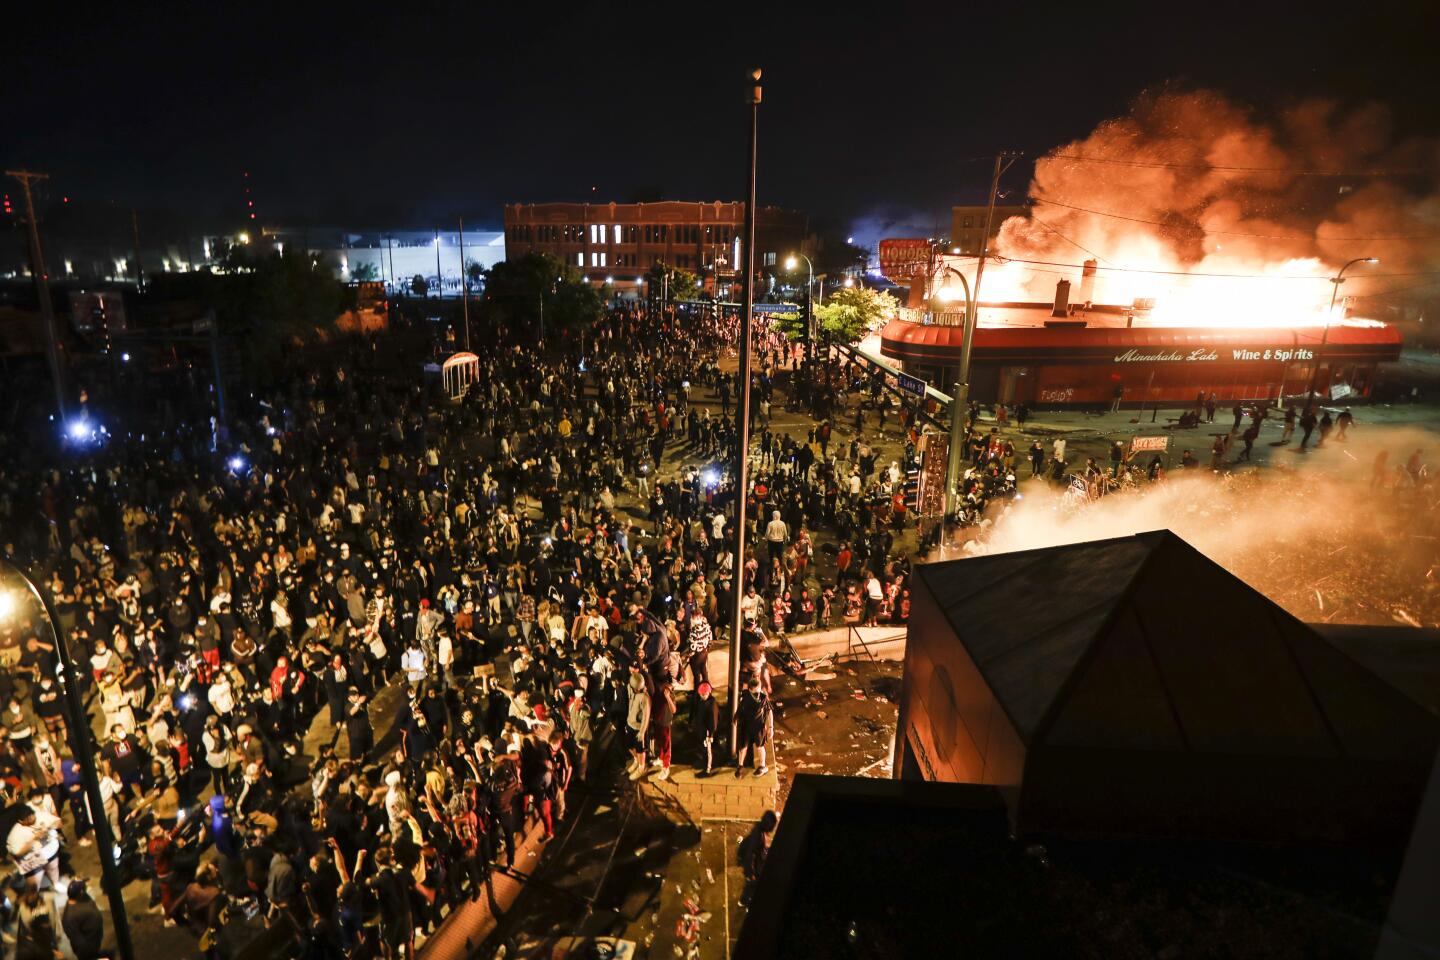 Protesters demonstrate outside the Minneapolis 3rd Police Precinct, which is in flames.